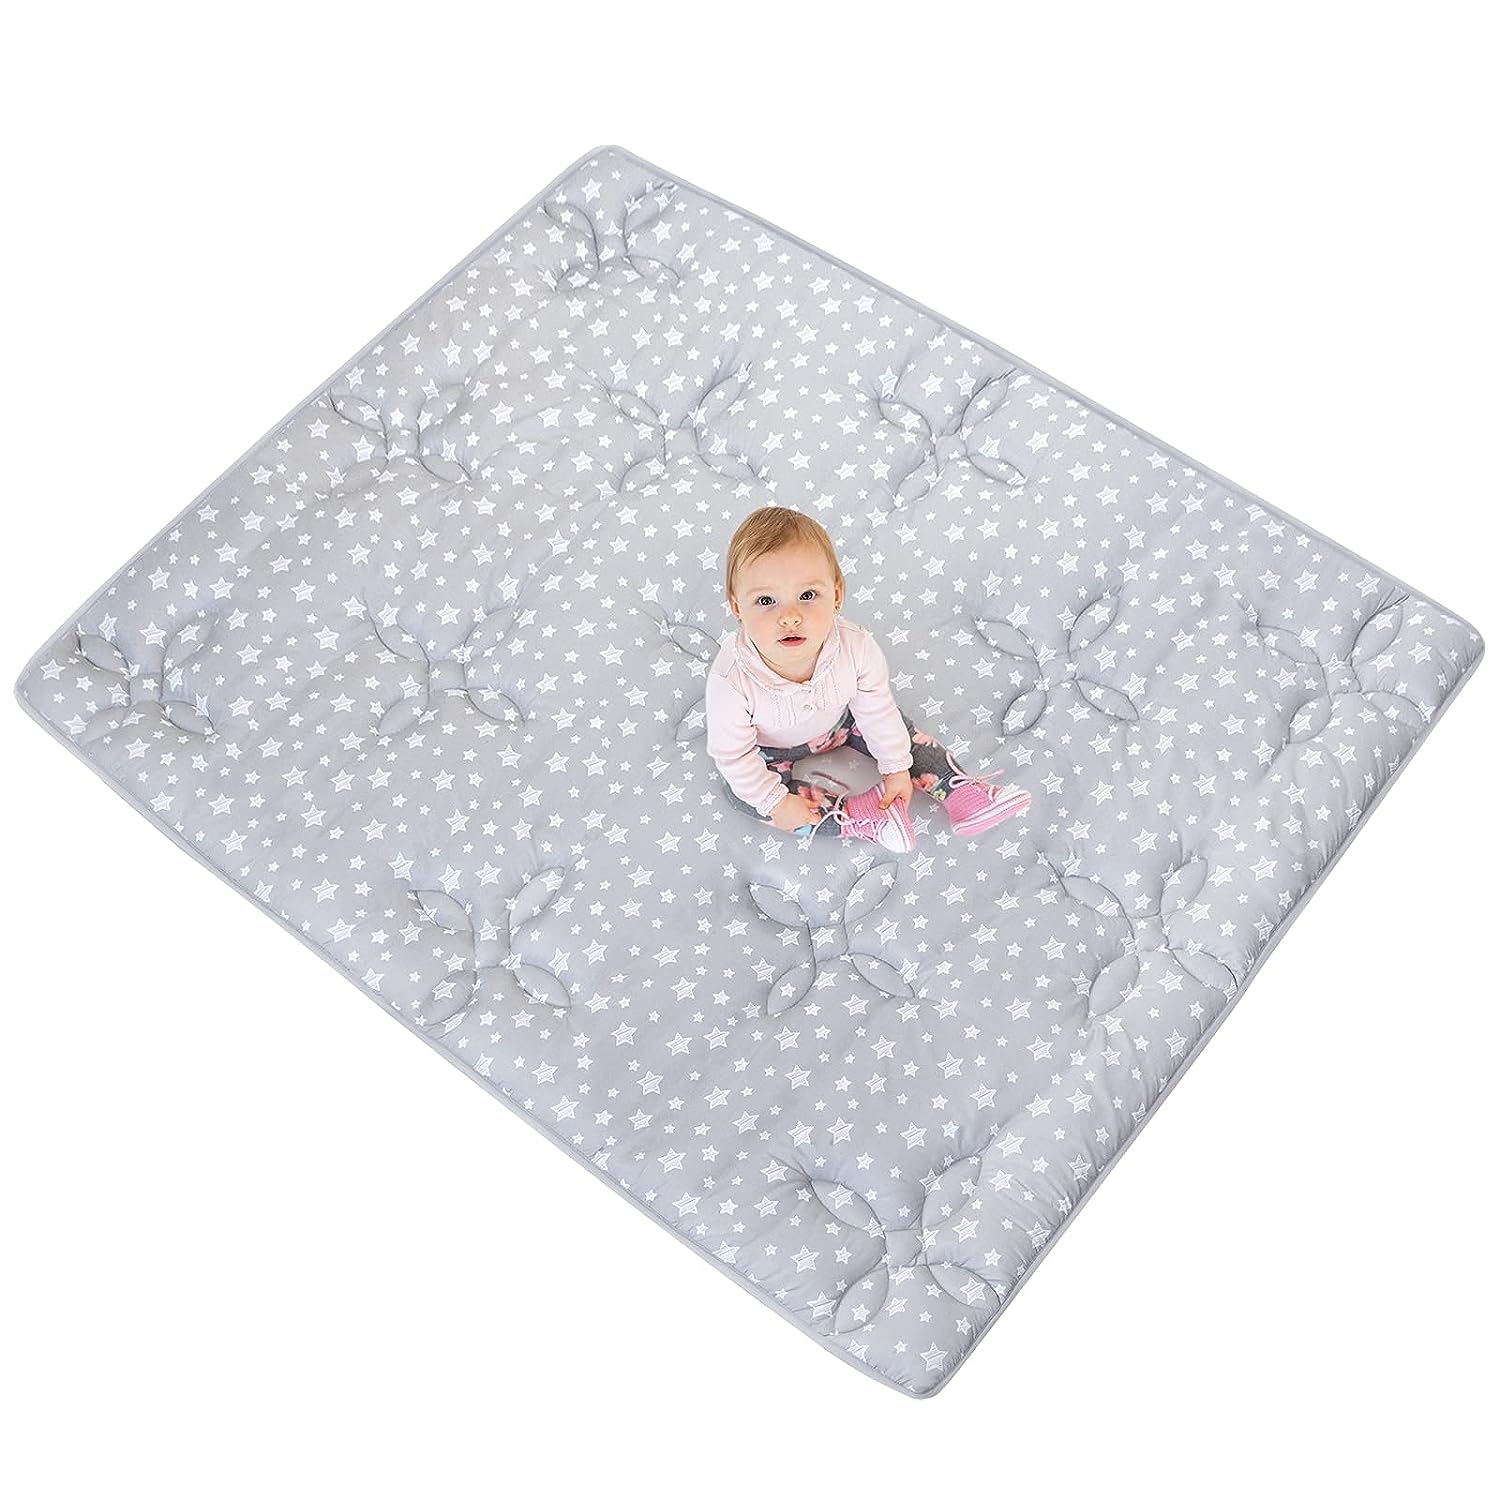 Baby Play Mat | Playpen Mat - 72" x 59", Large Padded Tummy Time Activity Mat for Infant & Toddler, Quilted with Four-Leaf Clover, Grey Star - Moonsea Bedding